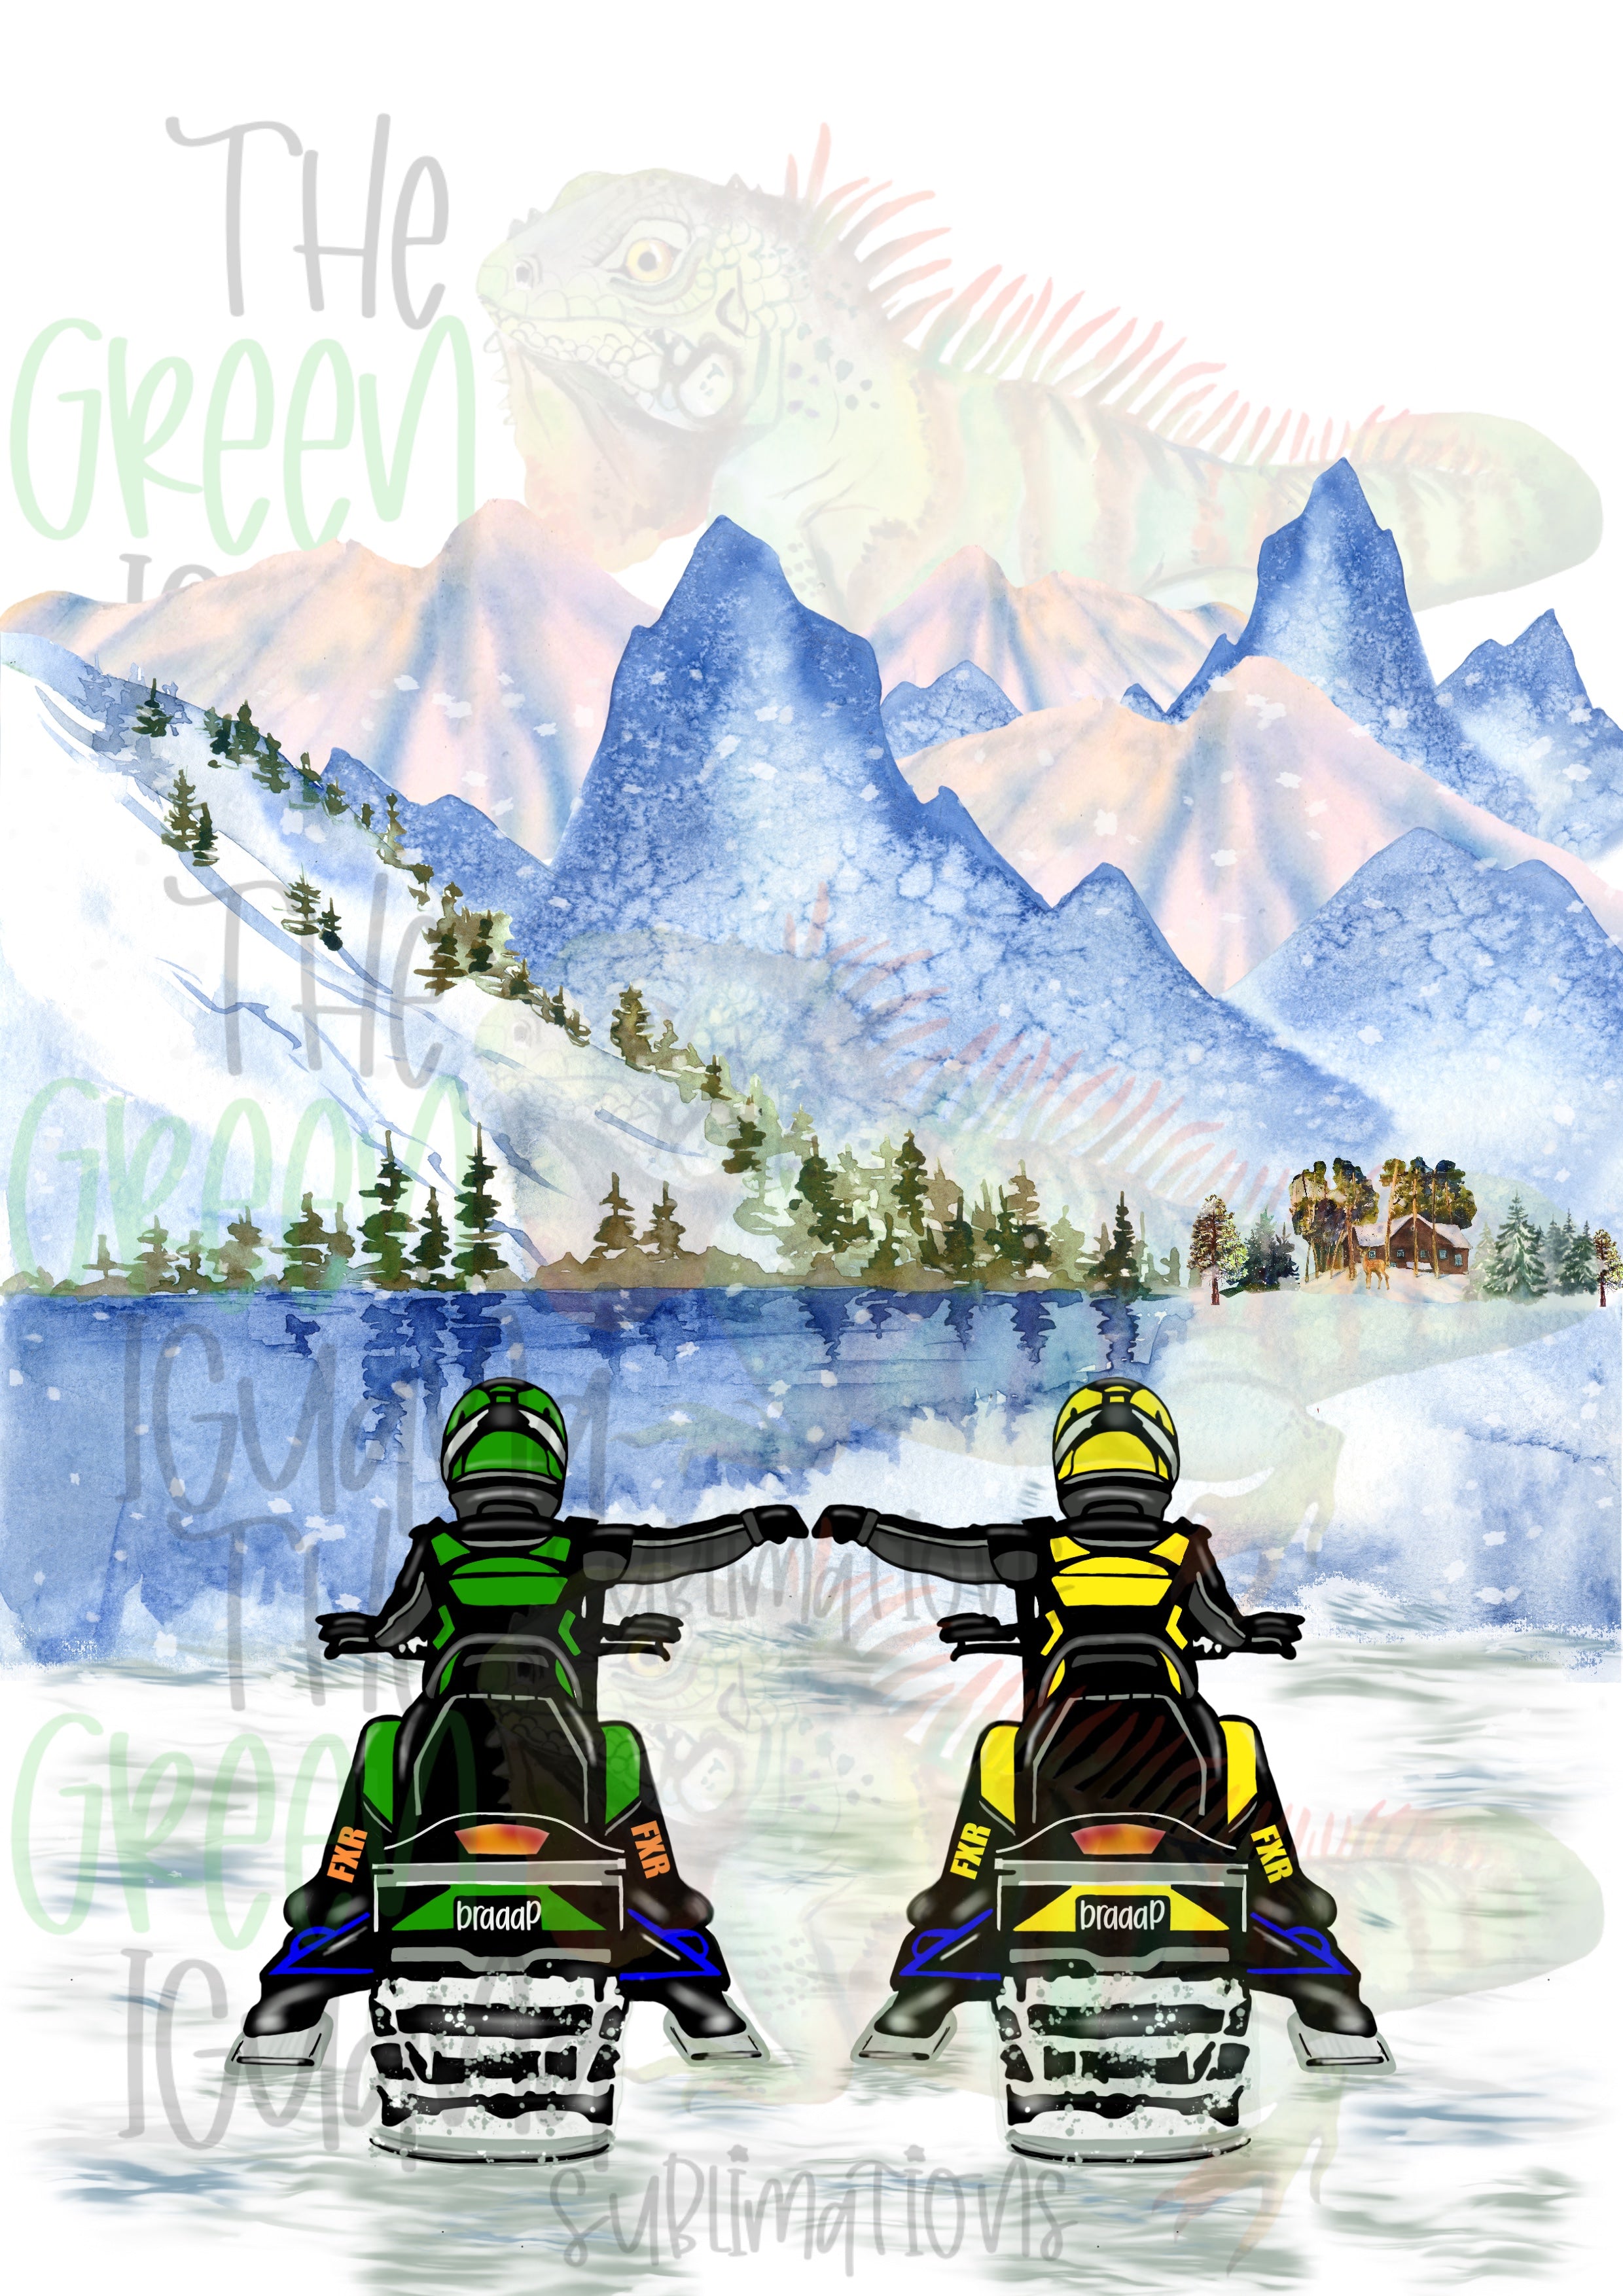 Snowmobile couple/friends - lime green & yellow